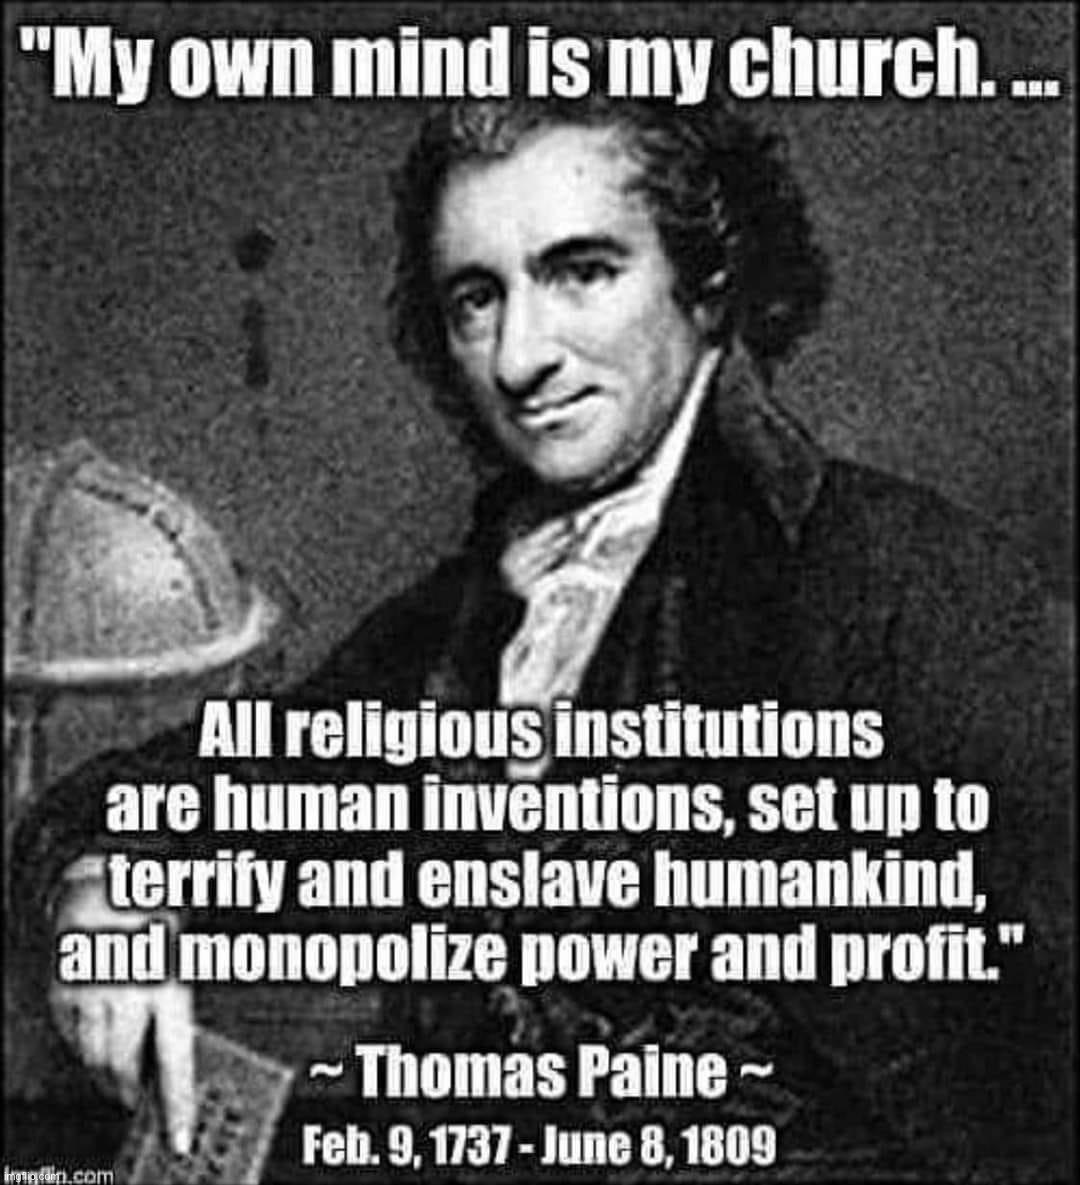 Based | image tagged in thomas paine quote,based,thomas paine,religion,anti-religion,anti-religious | made w/ Imgflip meme maker